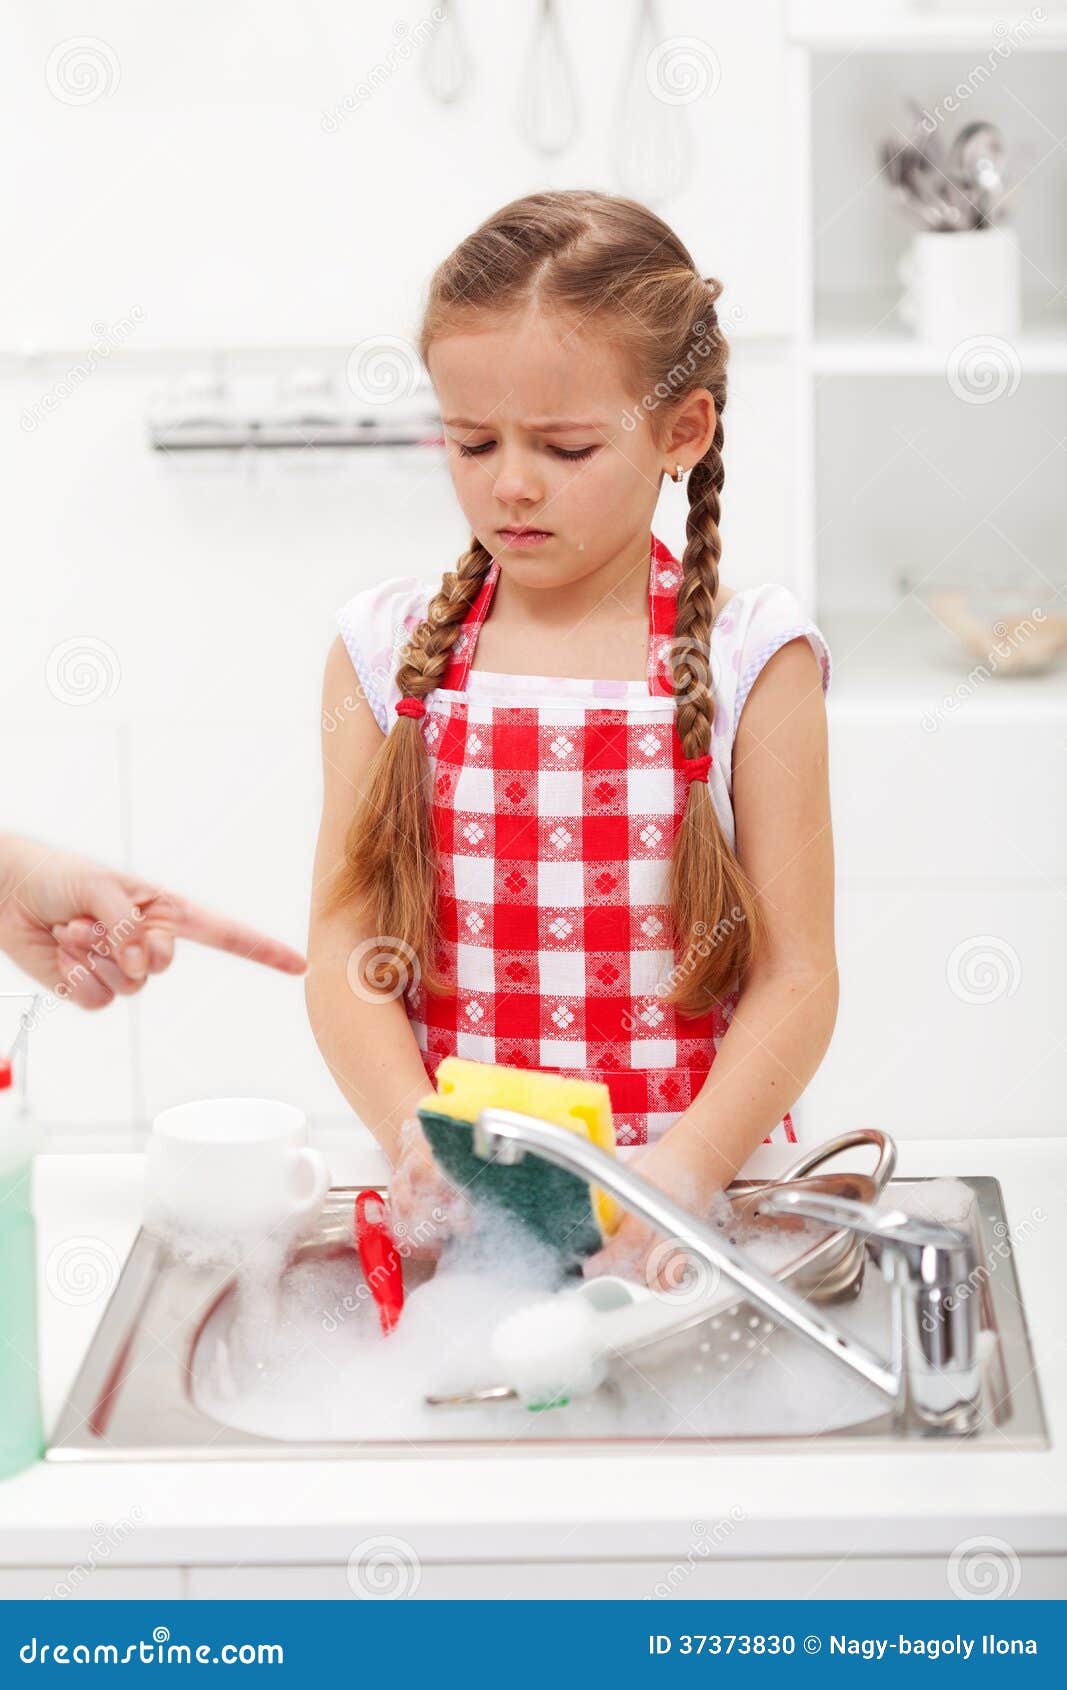 do the dishes this instant - child ordered to wash up tableware